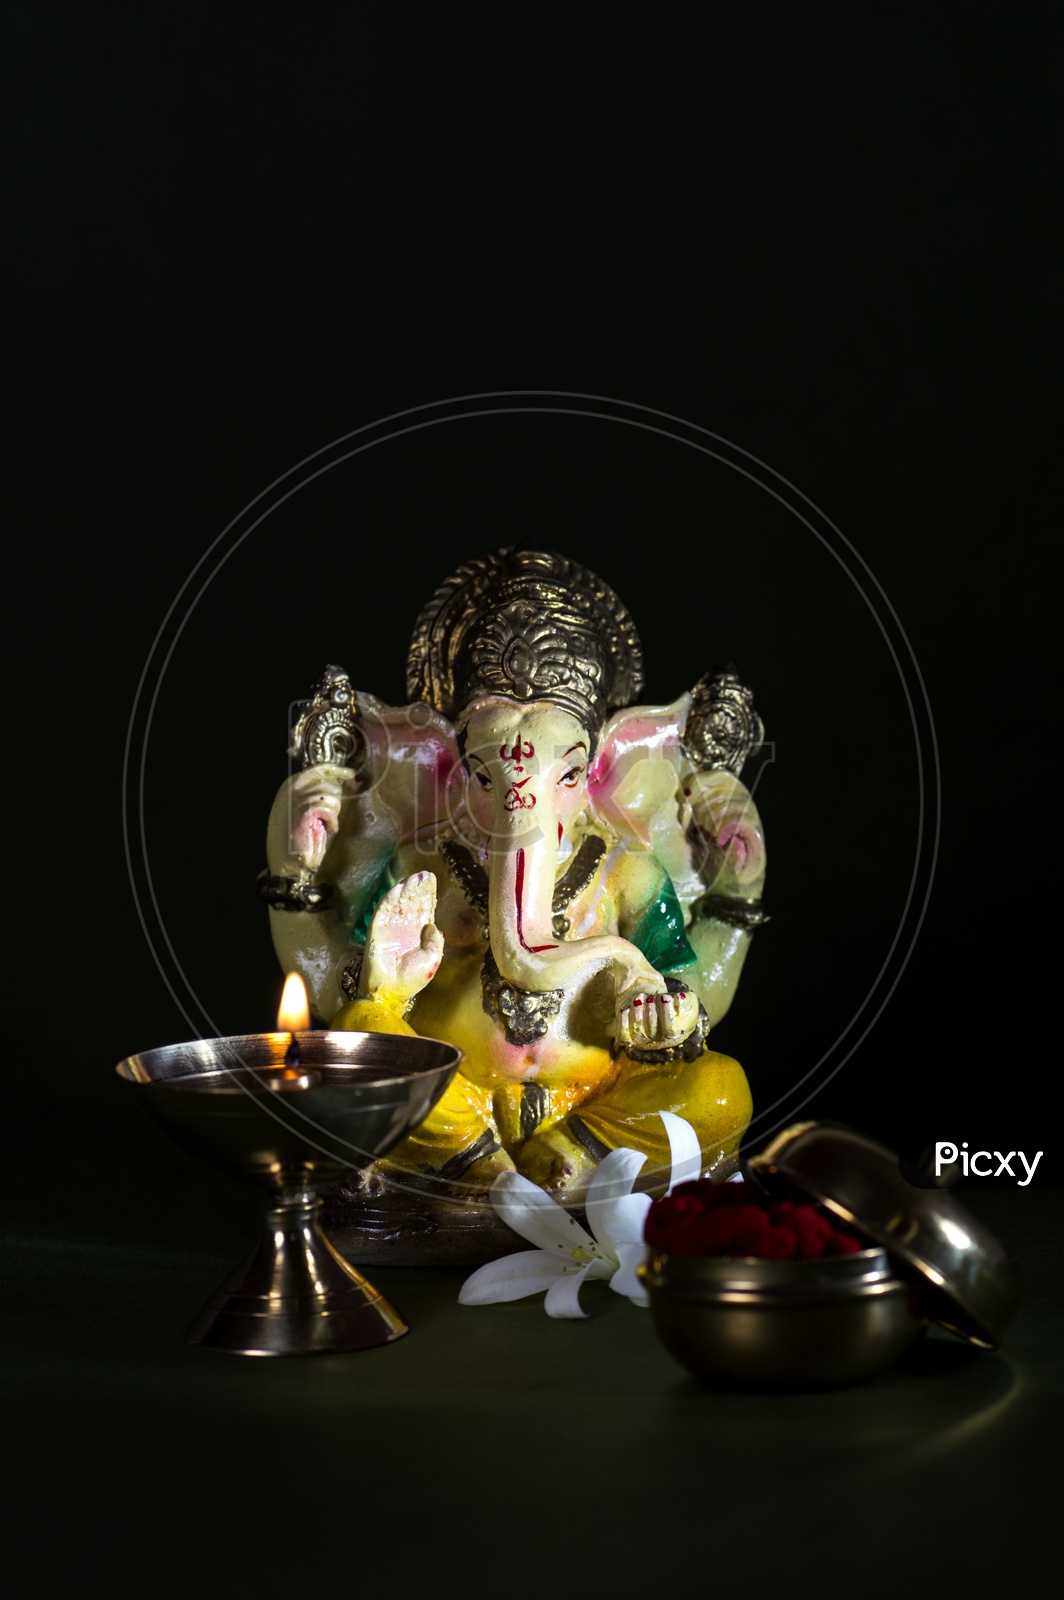 Lord ganpati abstract background for ganesh Vector Image